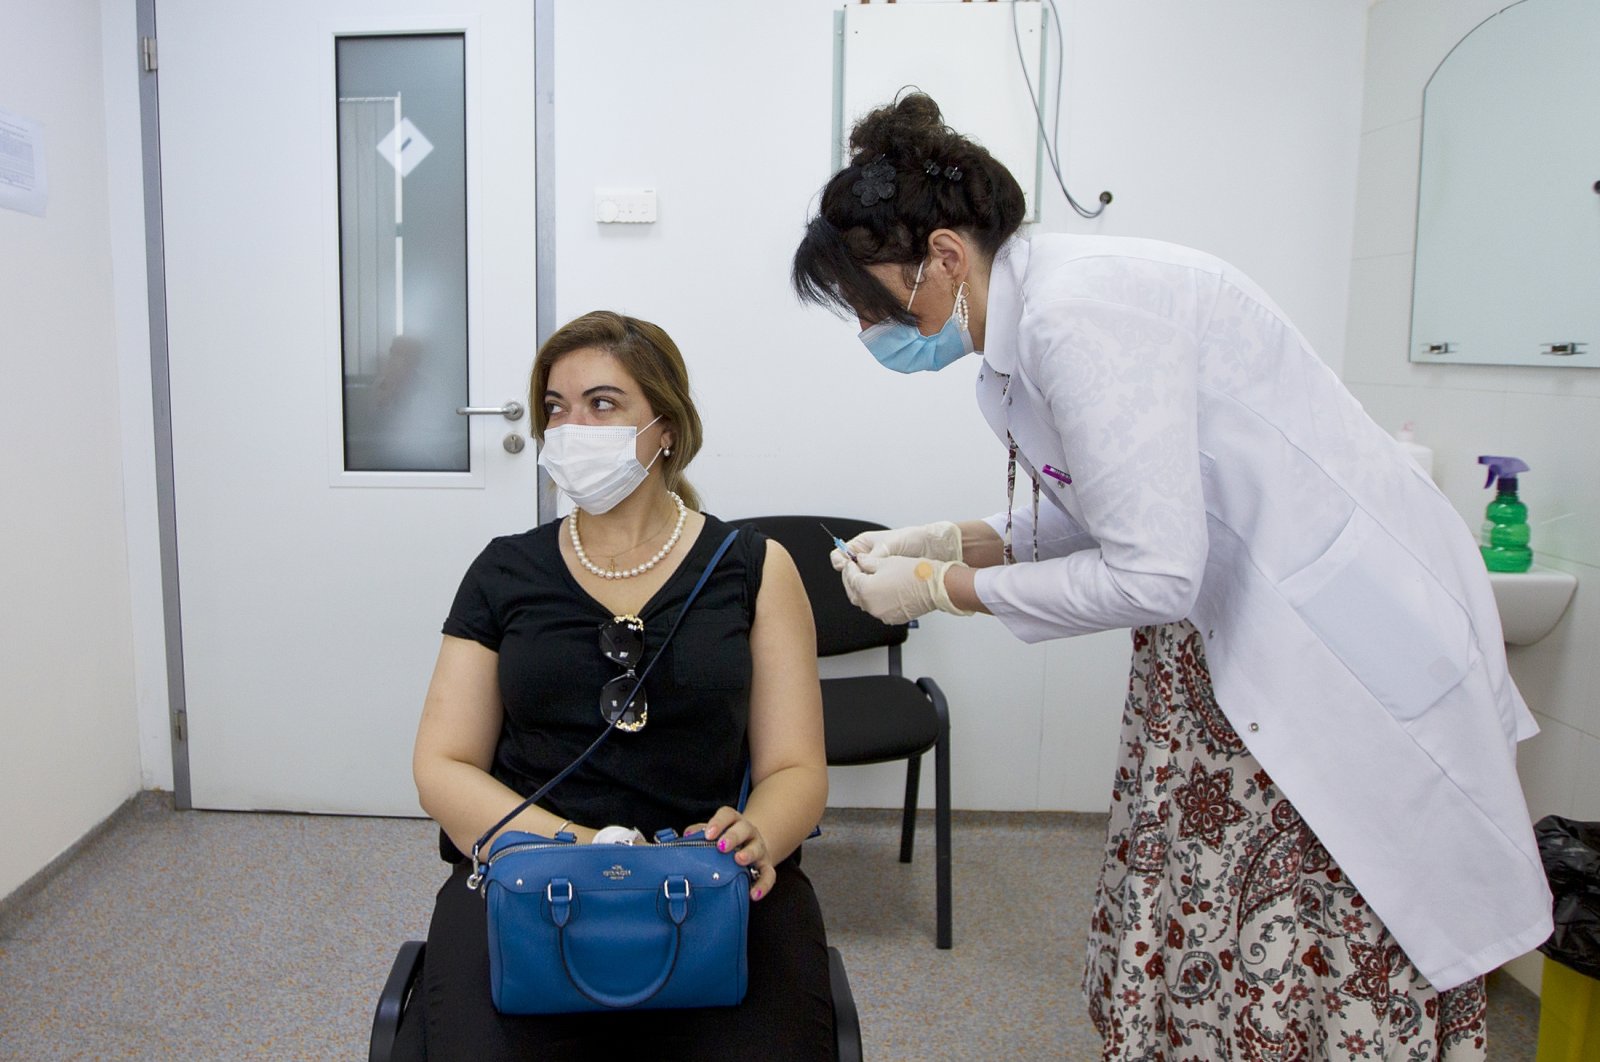 A medical worker prepares to give an injection of Pfizer coronavirus vaccine to a woman in Tbilisi, Georgia, July 27, 2021. (AP Photo)